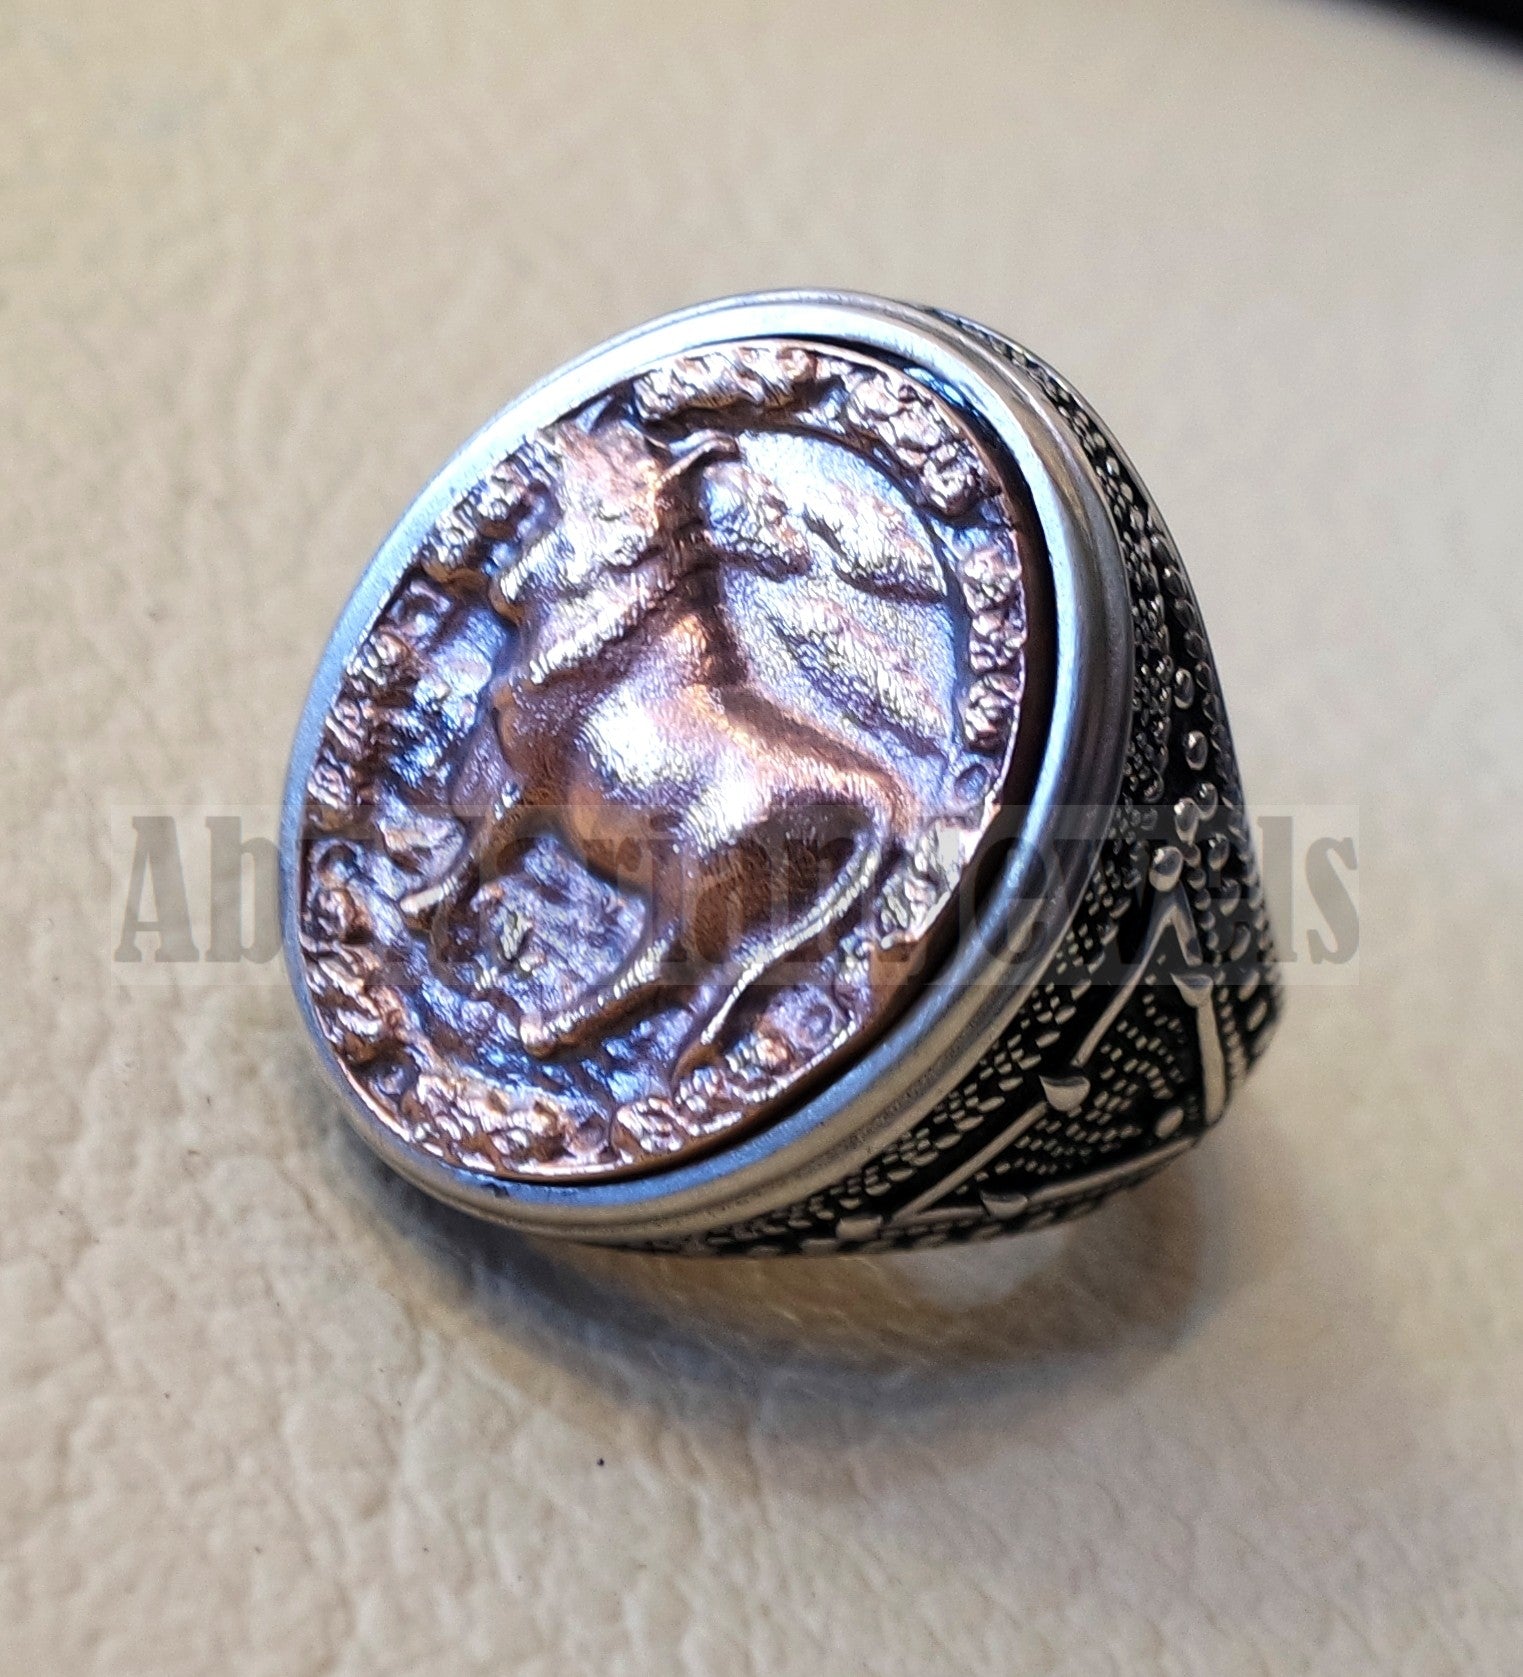 Horoscopes zodiac sign Taurus sterling silver 925 and antique bronze huge men ring all sizes men jewelry gift that bring luck fast shipping